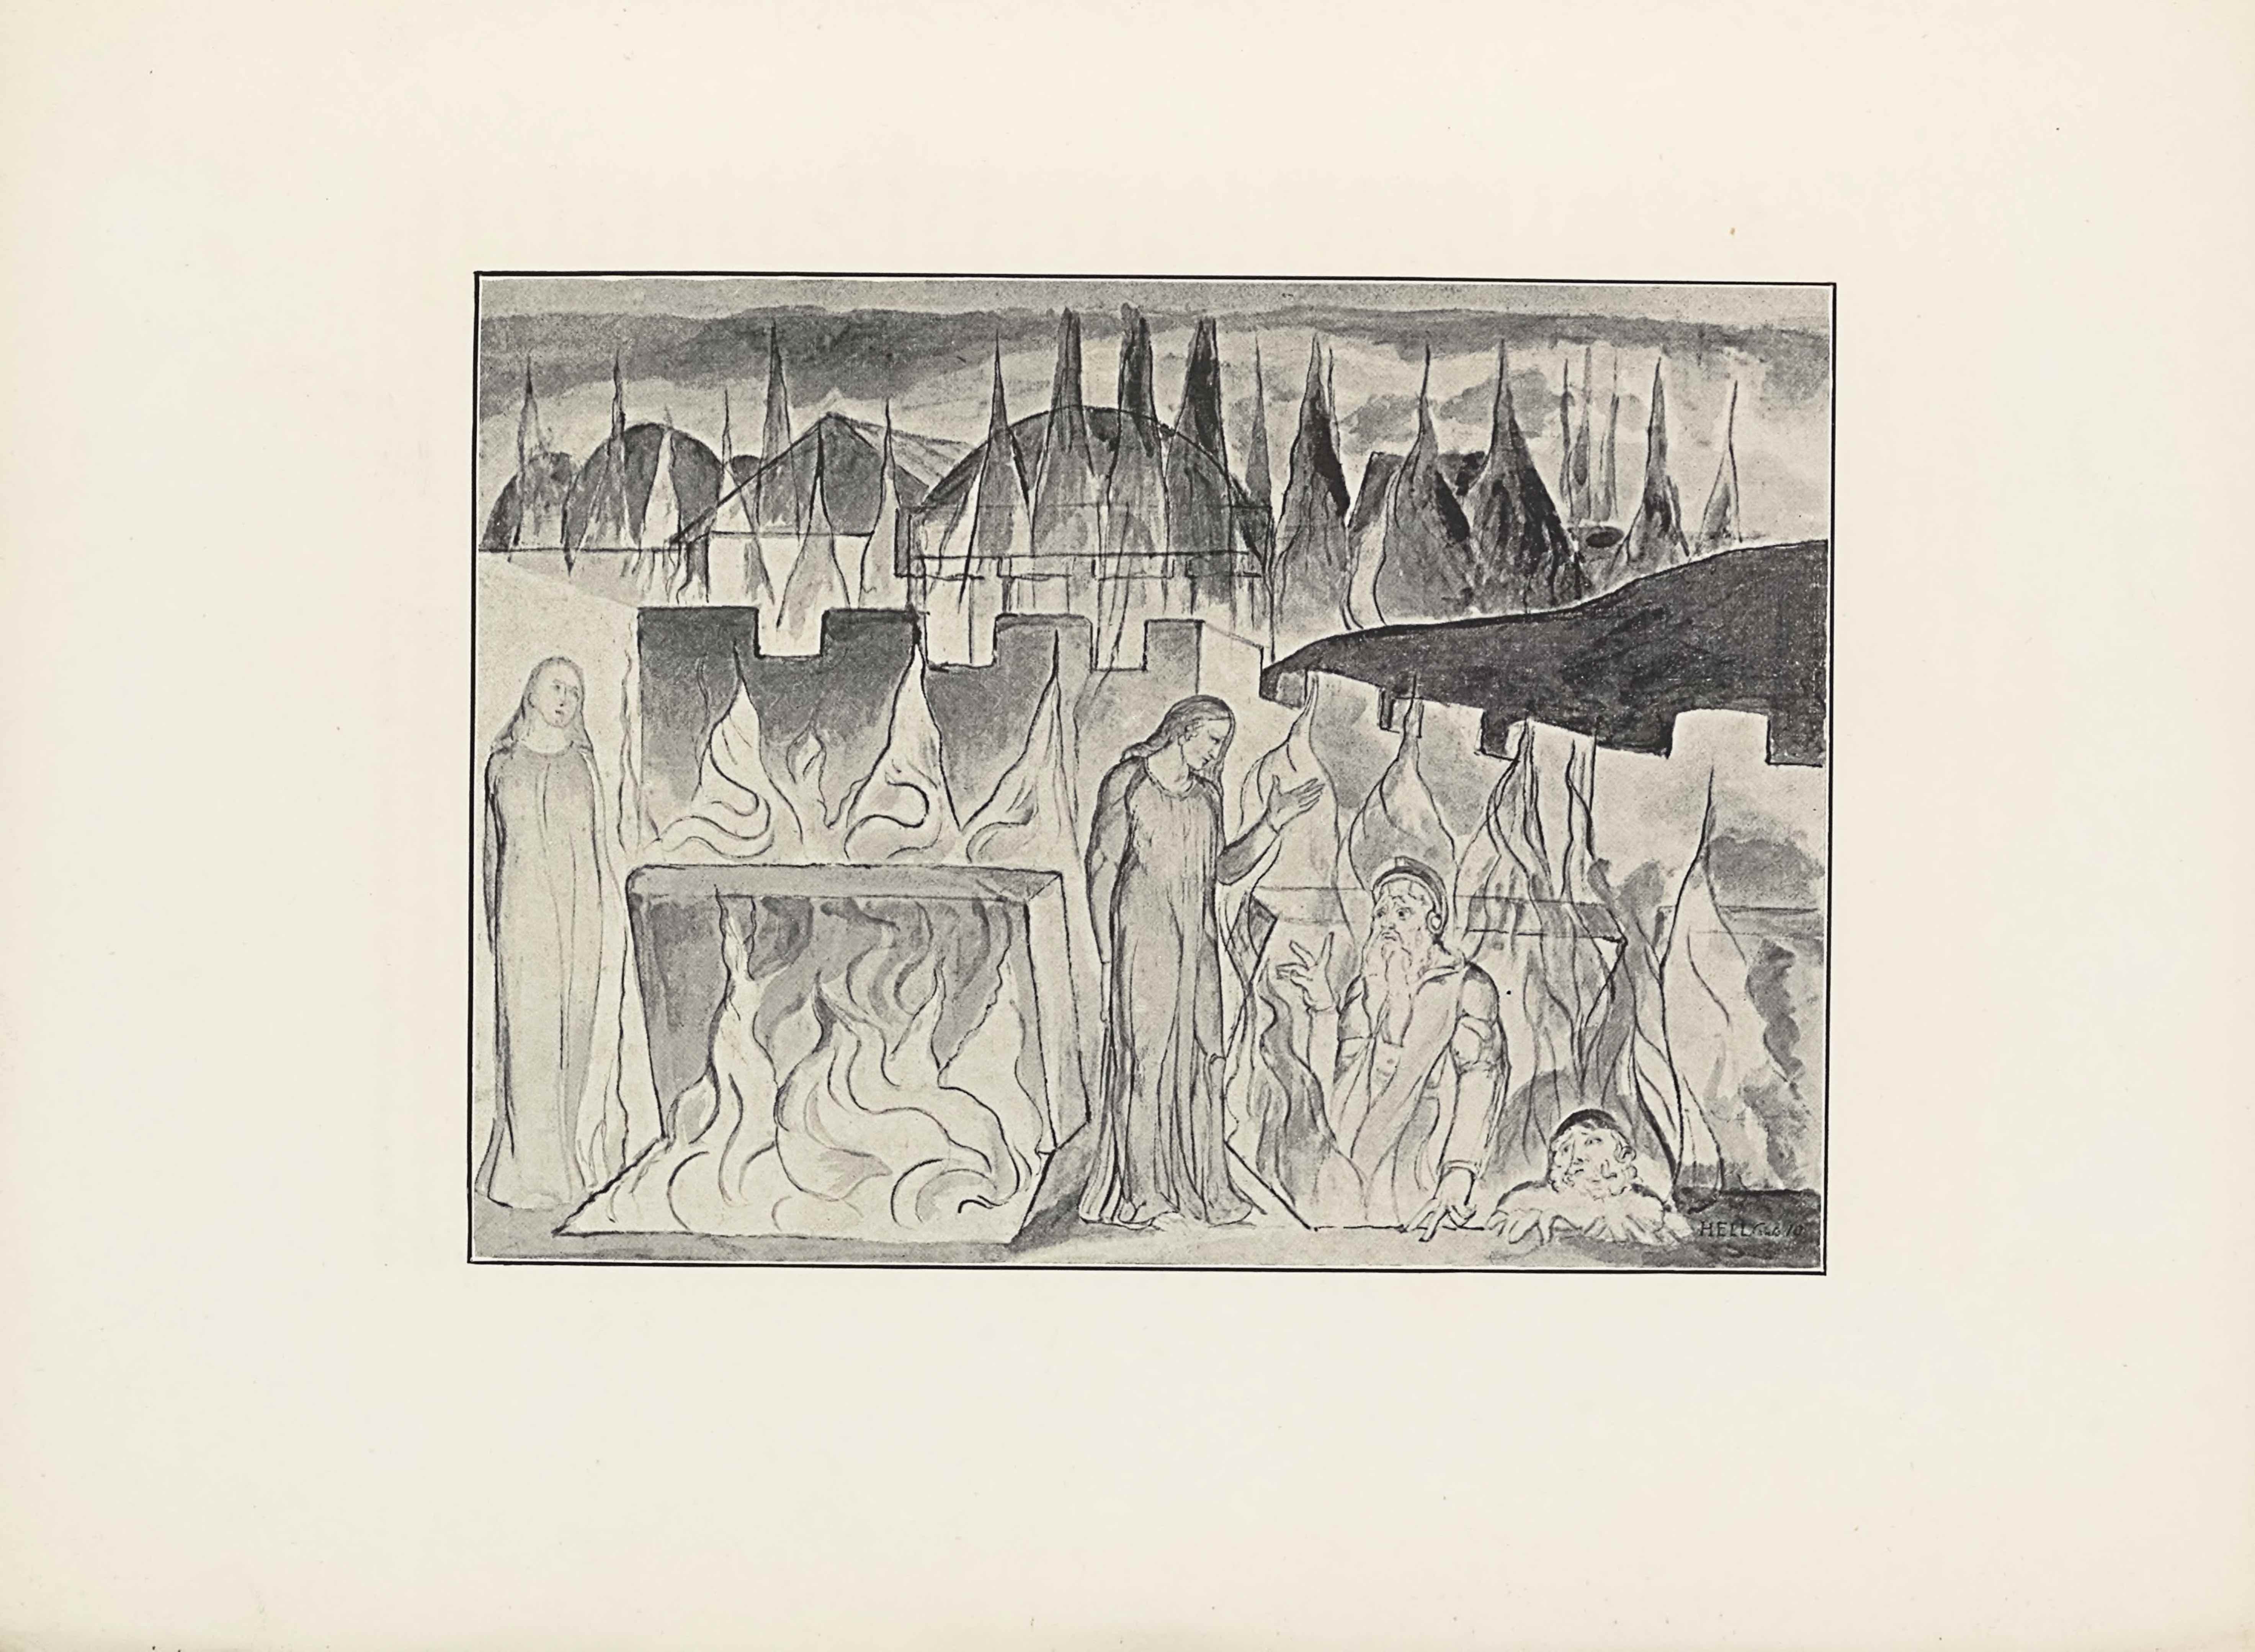 This halftone reproduction of a water-colour drawing by Blake for Dante’s                  Inferno is in landscape orientation. The image shows a scene of a burning                  mausoleum with four figures in the foreground in the circle of Hell reserved for                  heretics. Dante stands on the far left of the foreground facing the viewer, but                  with his head turned to face to the figures emerging from the flames. He is                  wearing a plain long and loose robe. To his right is a slab tilted up to reveal an                  opening in the surface that he is standing on. The opening has flames rising out.                  Just behind the slab is a series of three more flames. To the right of the opening                  is another standing, robed figure, possibly Farinata rising out of the tomb. His                  body is facing the viewer, but turned slightly to the right. His left hand is open                  and raised out in front with his elbow bent at a ninety degree angle. He has his                  right arm tucked just behind his back. his head is tilted down to look at the man                  below to the right, who is emerging out of a second fiery pit. Only his upper body                  is visible. He is turned towards the left and iis wearing a partially visible                  armoured shirt, with flames licking the front. He has on a helmet too. His left                  hand in resting on the ground and his right hand is raised towards the man                  standing to his direct left, with the middle and pointer fingers extended separate                  from each other and the rest of the fingers. He has a long white beard and tufts                  of white hair on his head protrude out from the front of his helmet. To the right                  of this man is another man who is deeper in the same pit, only showing his                  shoulders and head. He is facing the viewer, but his head is turned towards the                  figures to his left. His hands are gripped onto the edge of the surface. He has a                  white beard and white hair. His eyes are wide and his mouth is downturned. Behind                  these four figures is a castle wall with rectangular merlon and embrasure rise and                  falls along the top edge. The wall is parallel to the bottom edge of the image                  from the left side until about the centre and then starts to recede back angled up                  to the right. Behind the castle wall on the right side of the background is a dark                  hill. In the very background, essentially the top quarter of the page, is a                  skyline of a town. There are about six building roofs along the horizon that are                  visible. In front of the building roofs is a line of flames. Behind that part of                  the scene is a cloud, dark sky. In the bottom right corner there is the text:                  “HELL [caps] Canto 10”. The image is surrounded by a single black line                  border.